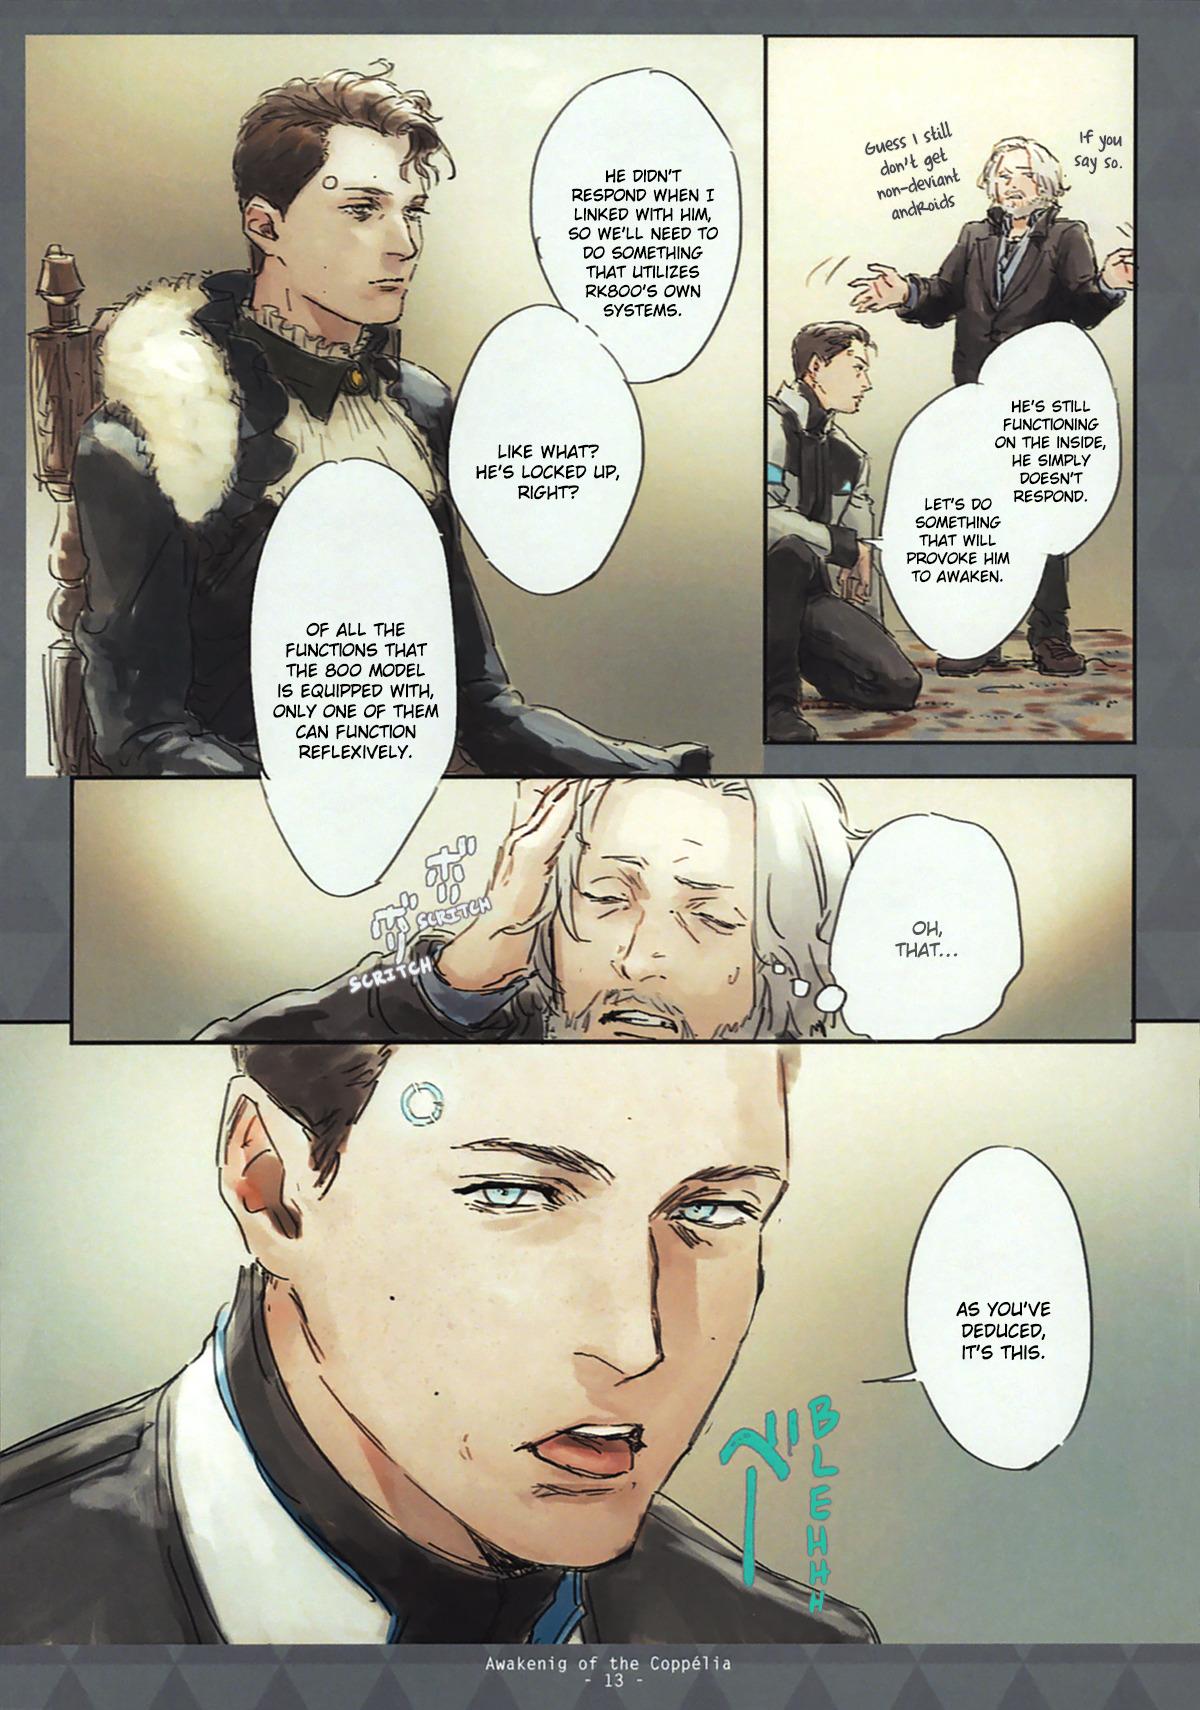 Blow Job Contest Awakening of Copper - Detroit become human Shower - Page 9